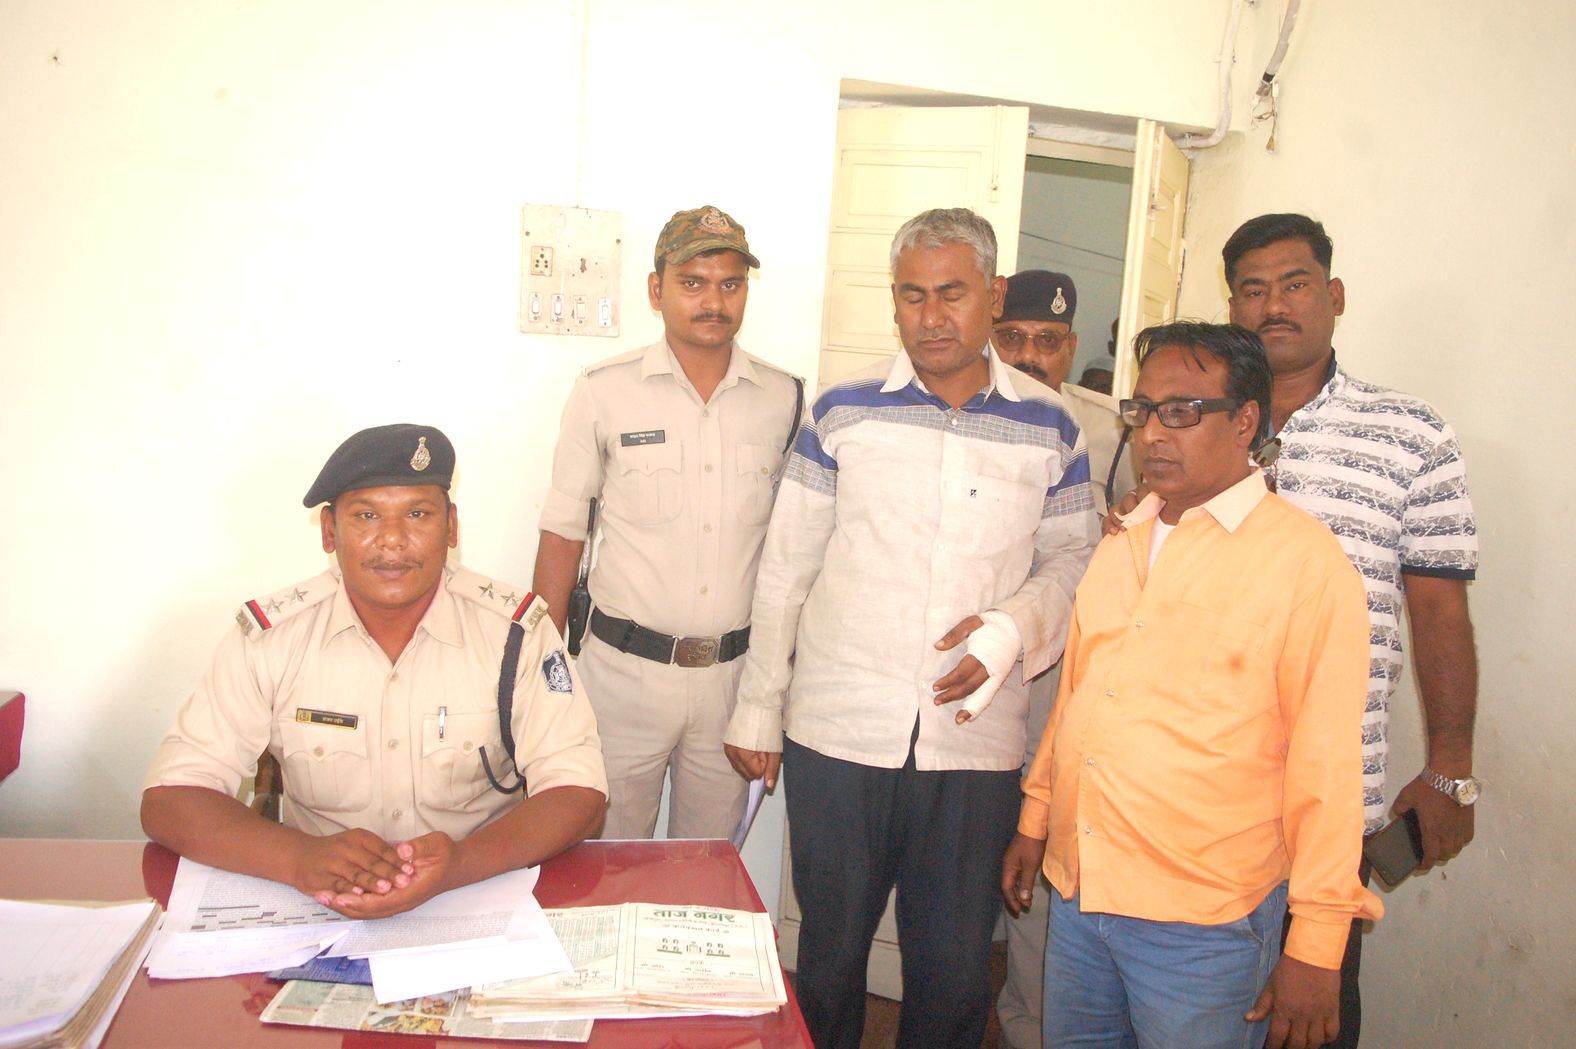  FIR on three people again for cutting illegal colony, two arrested, one absconding